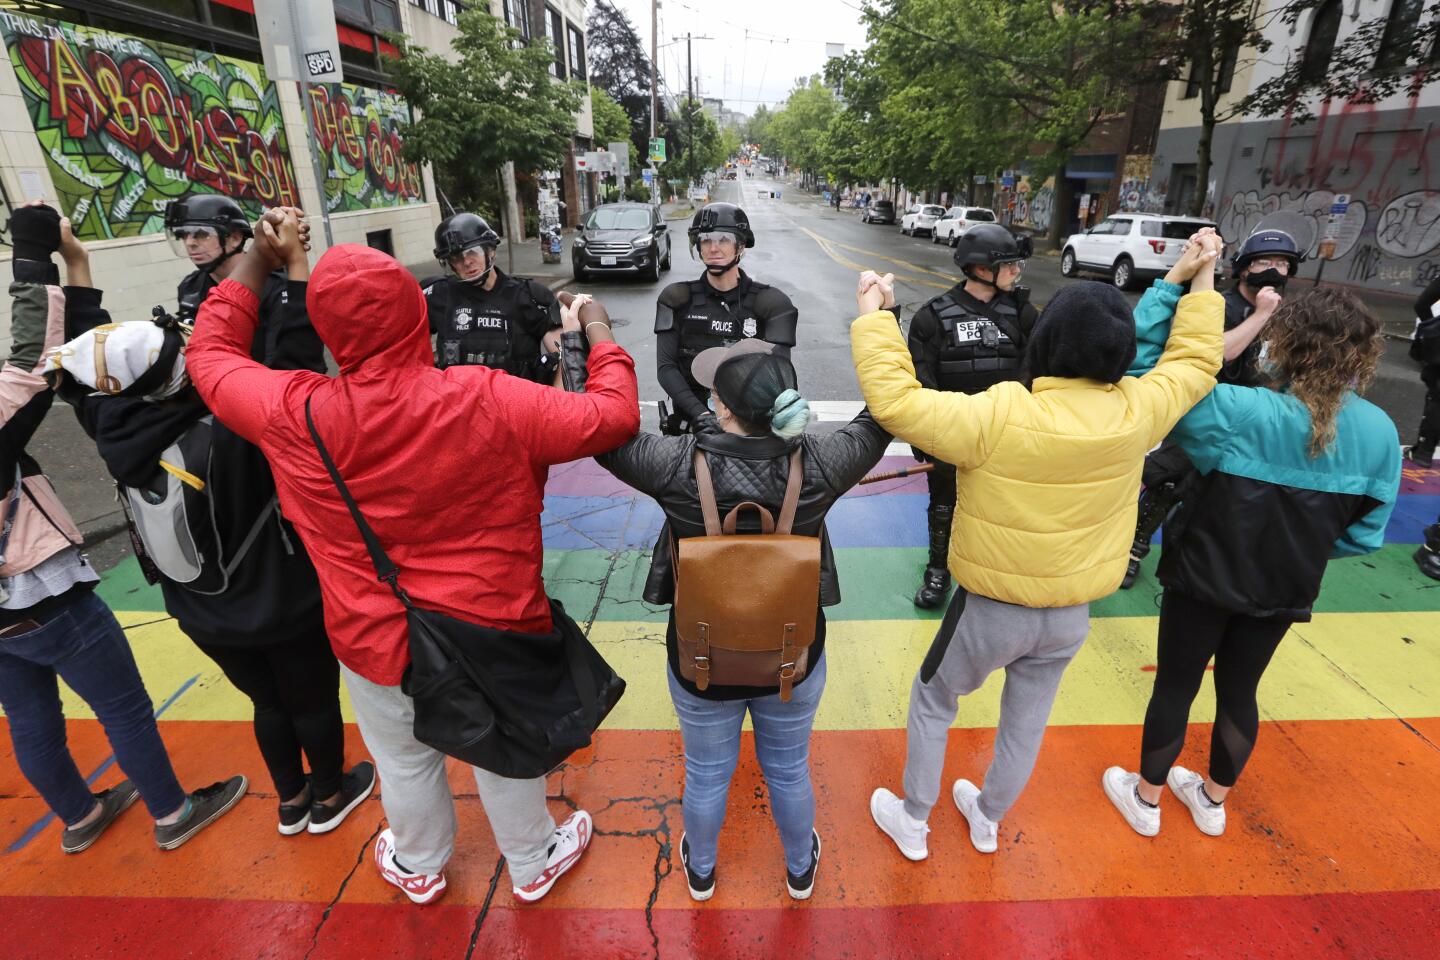 Police clear out Seattle’s protest zone